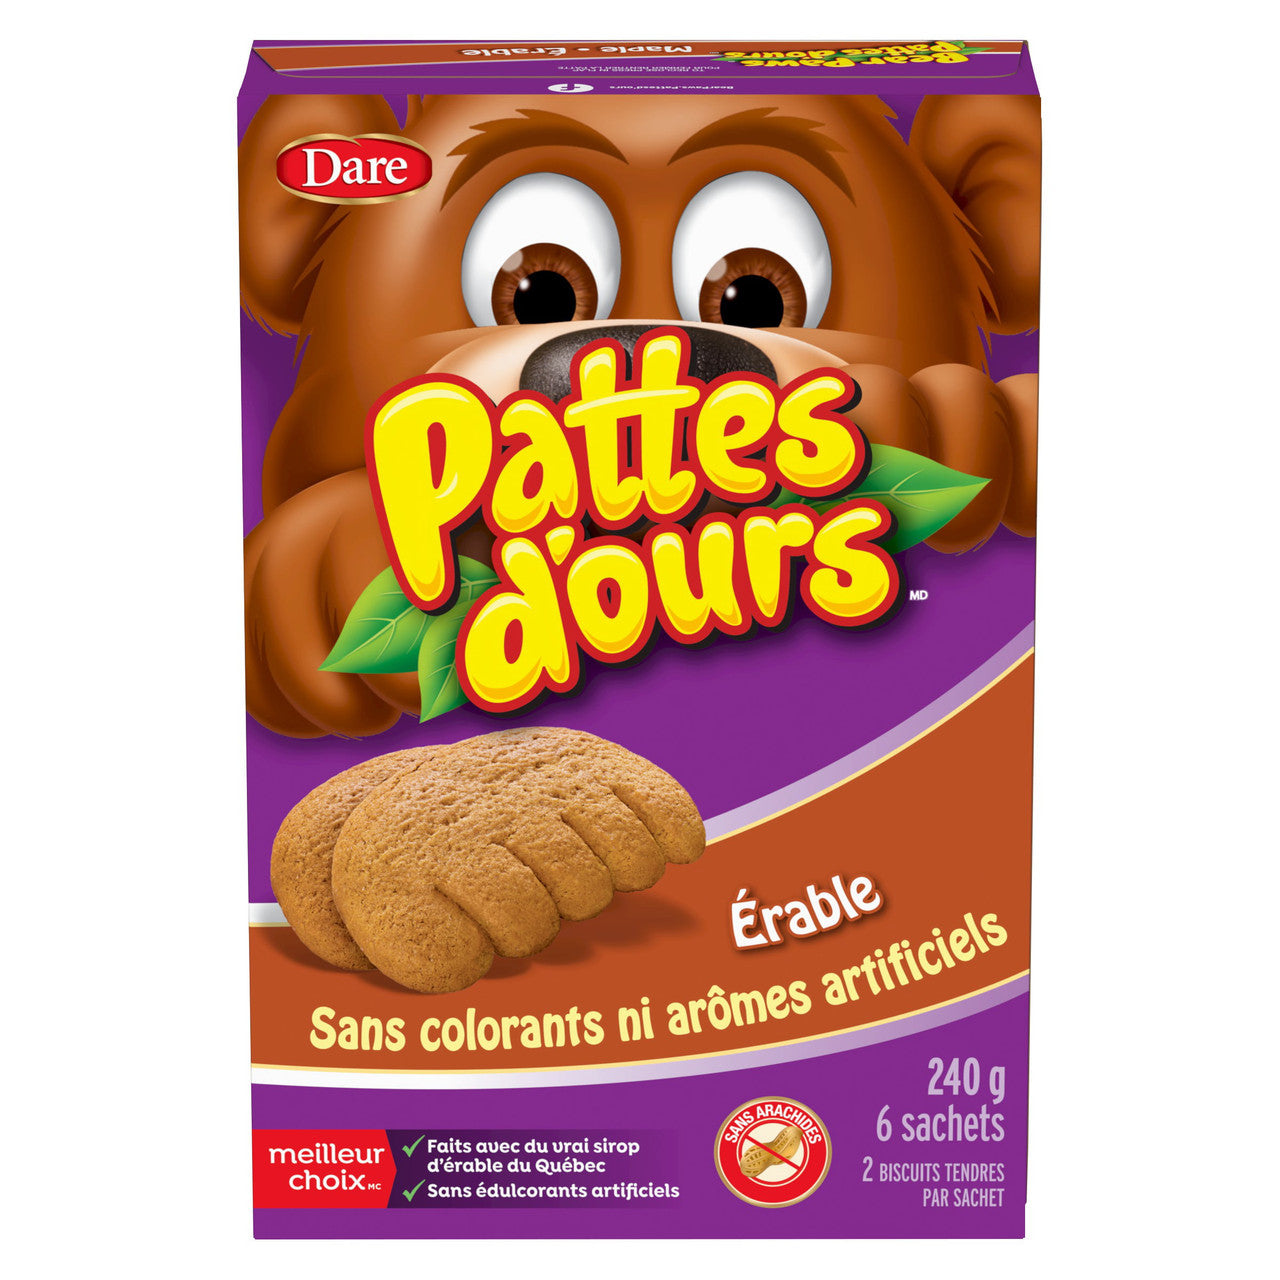 Dare Bear Paws Maple Cookies, 240g/8.4 oz, 6 Pouches, 1 Box {Imported from Canada}